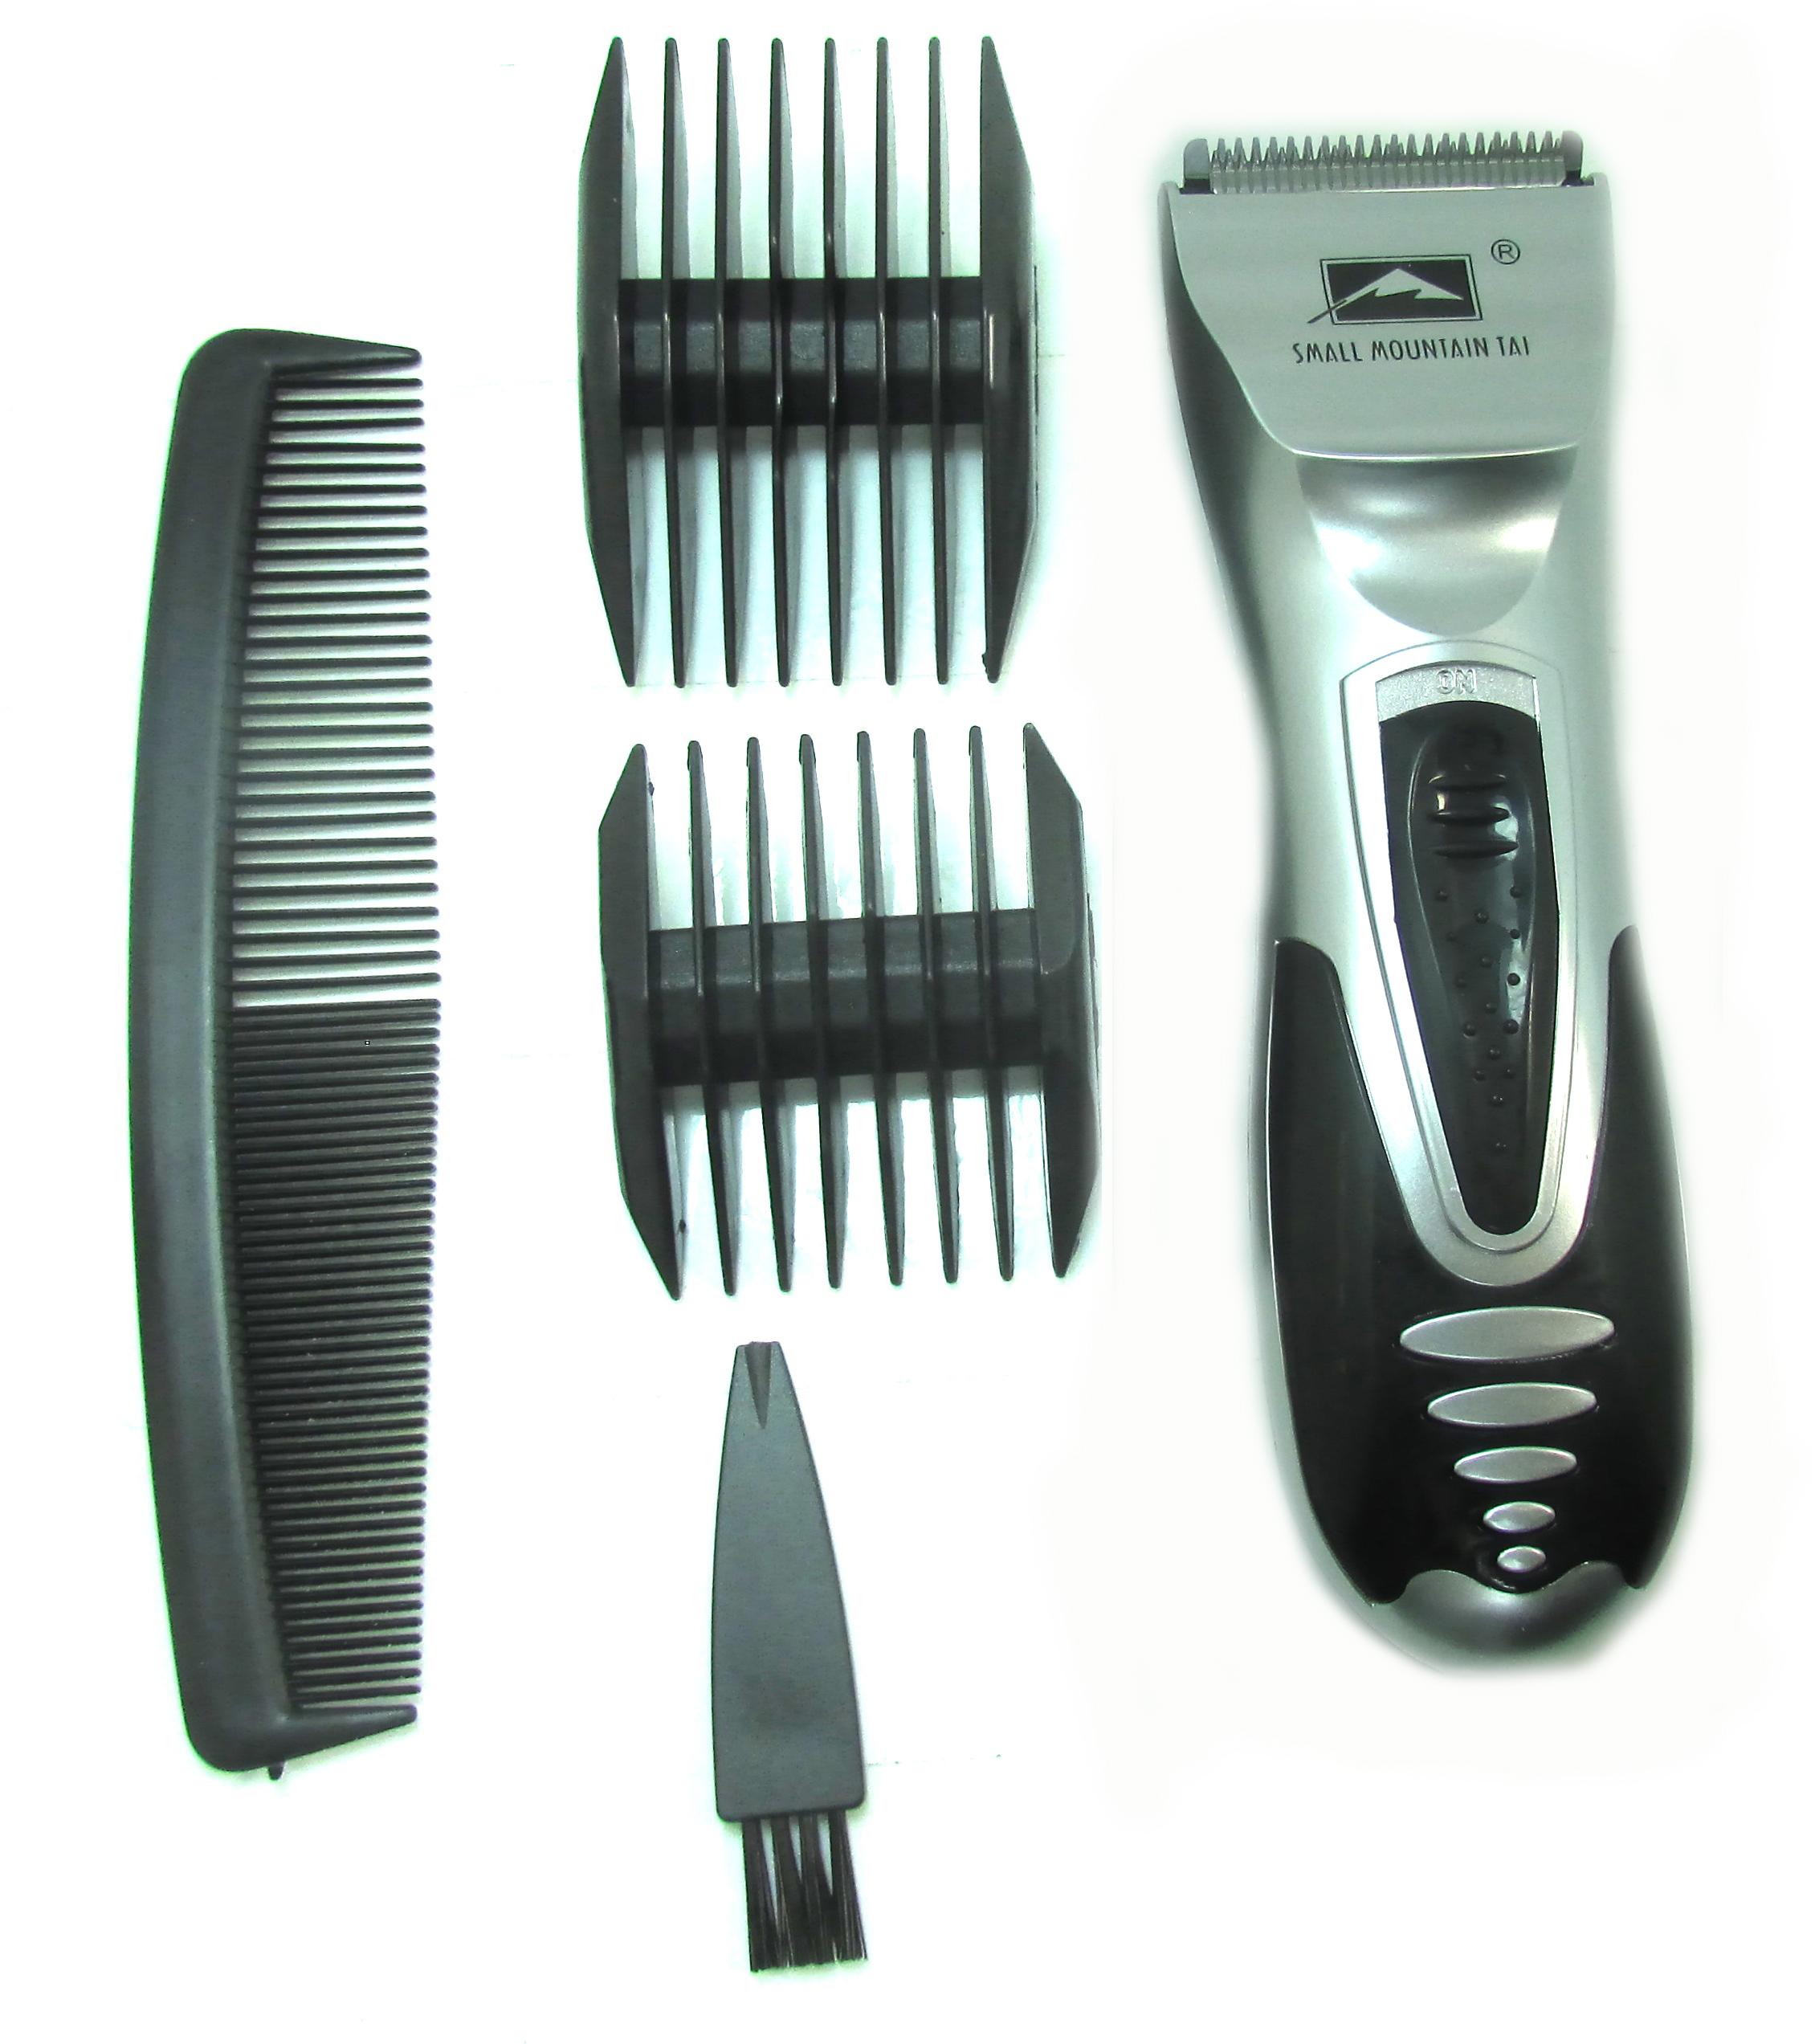 Free Shipping one pc PRO HAIR TRIMMER CLIPPER PORTABLE STYLER CUTTER GROOMER TRAVEL DRY BEARD BATTERY KIT